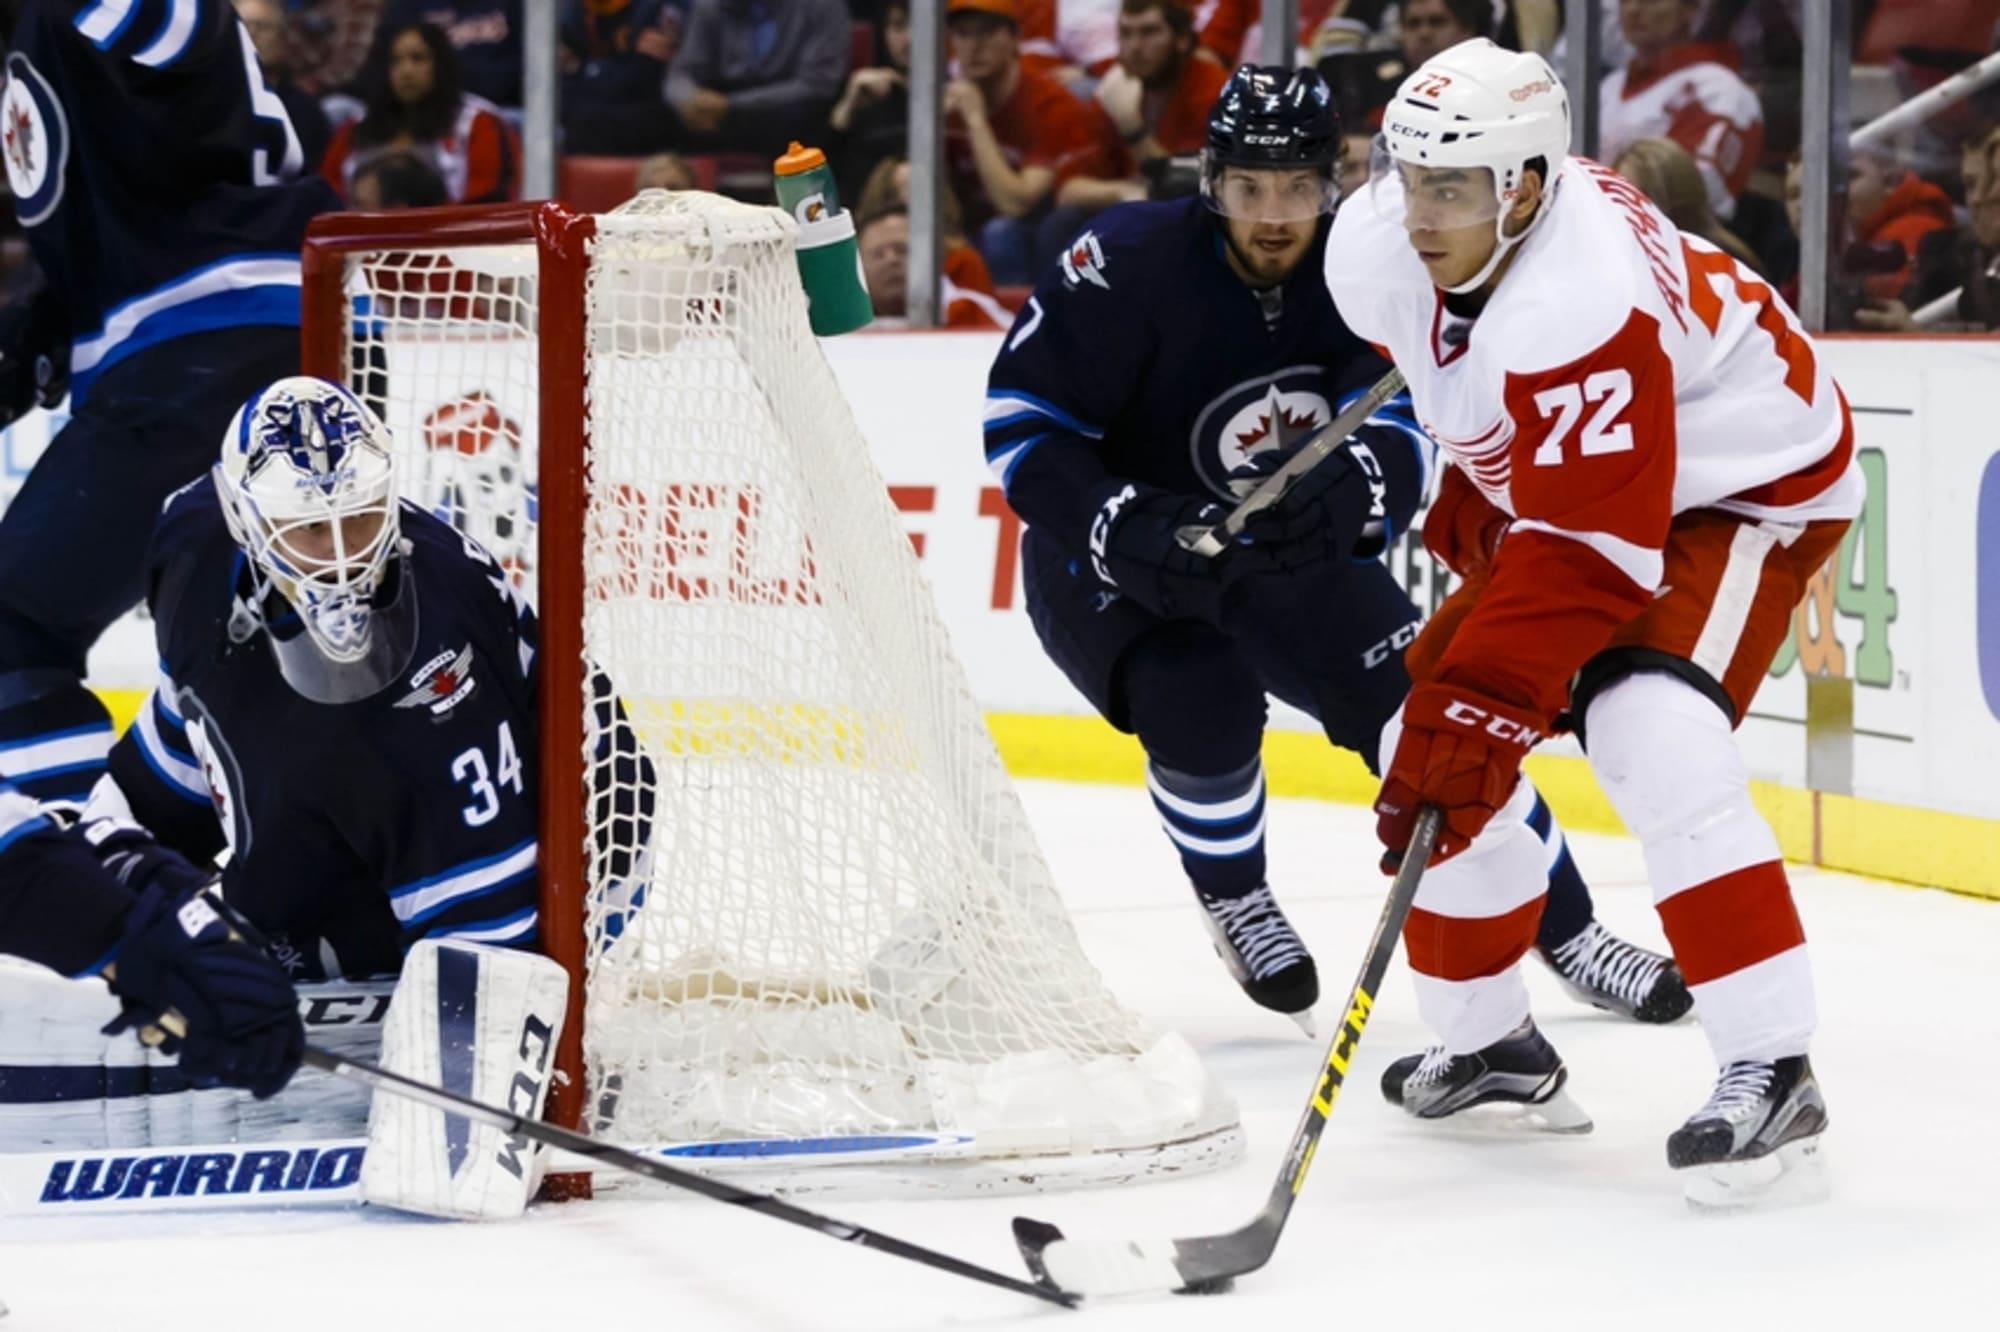 Detroit Red Wings vs. Jets: Game Time, TV, Radio, Live Stream